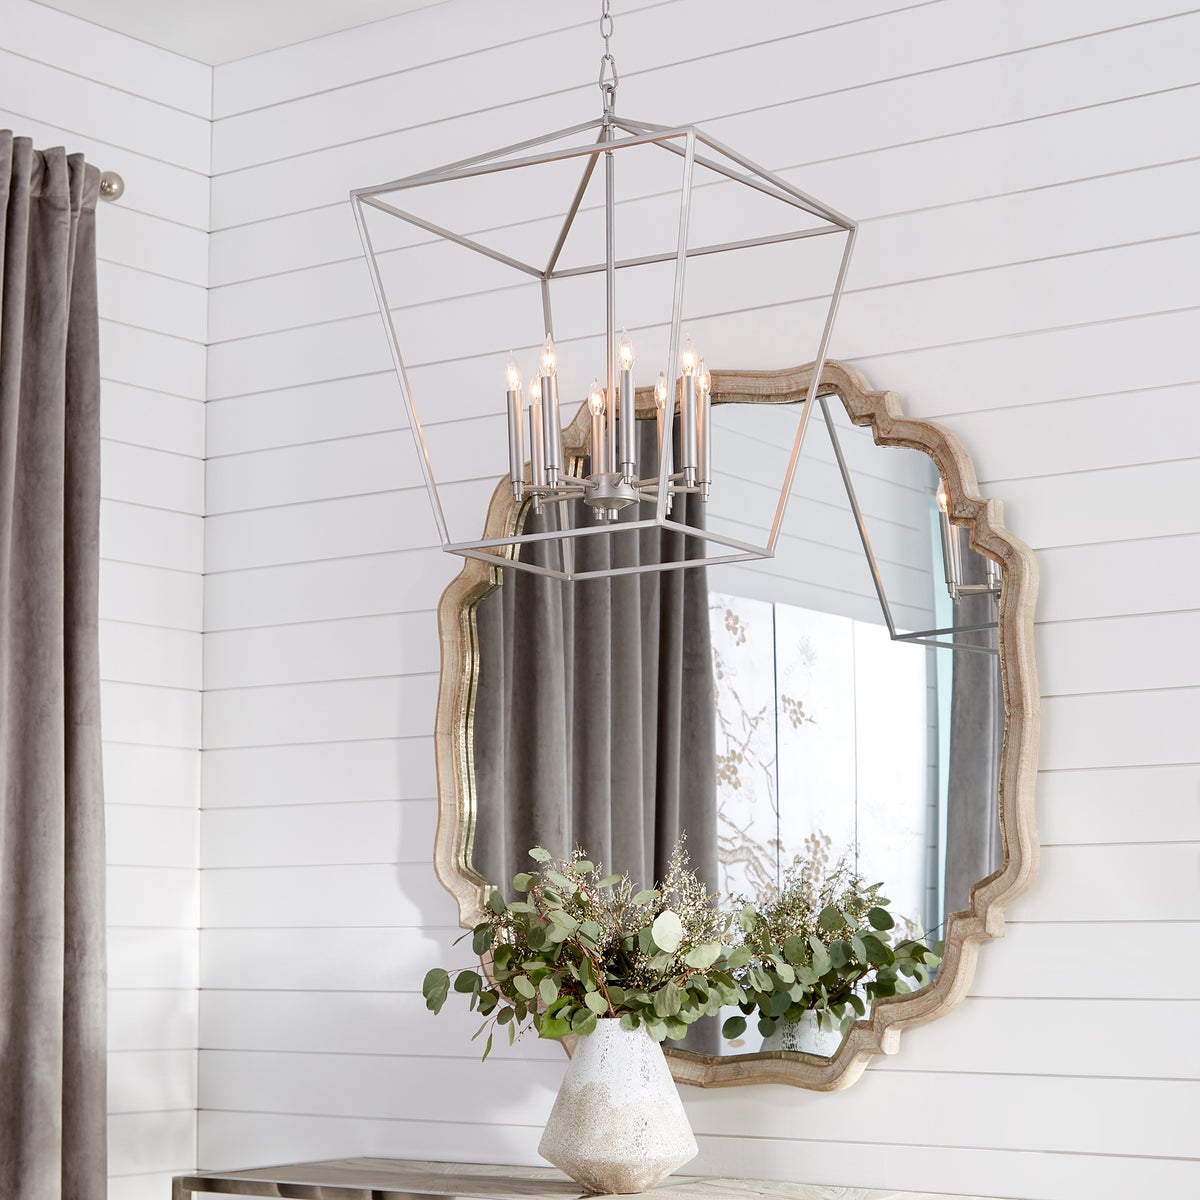 Farmhouse chandelier with open tapered shade, perfect for foyer, hallway, or kitchen. Fits candelabra bulbs for ample illumination. Dimensions: 22"W x 26.25"H.